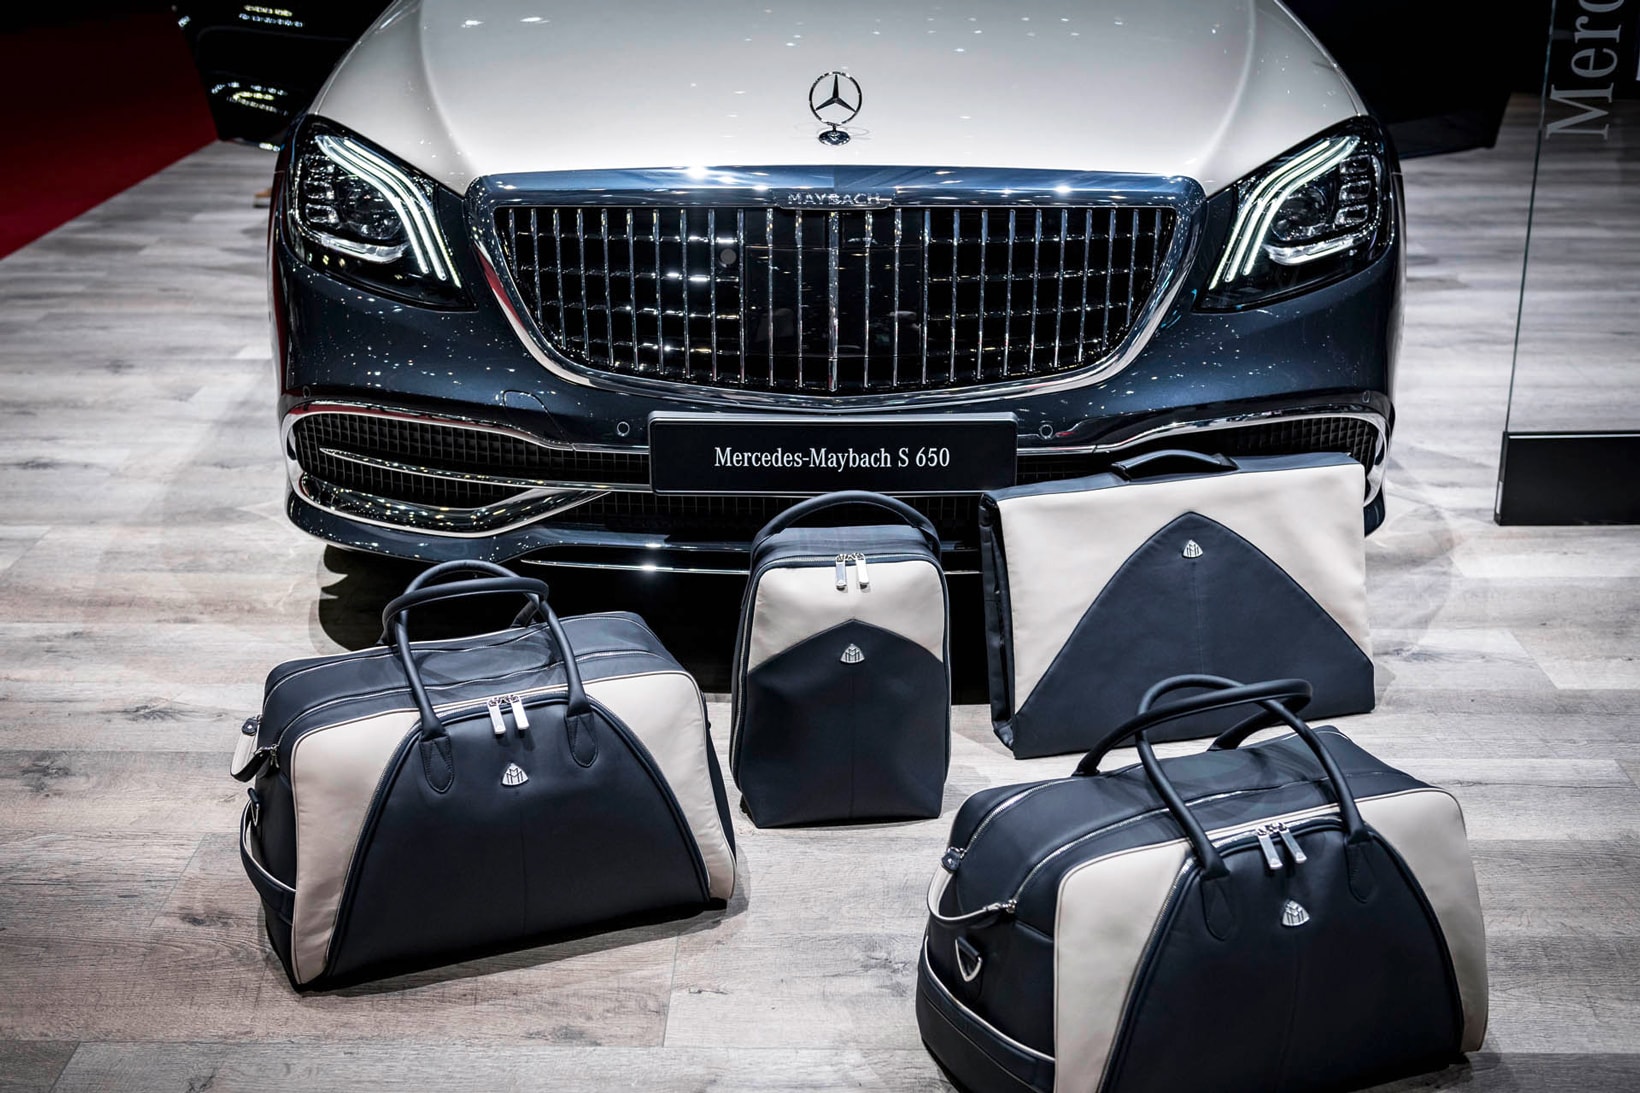 Mercedes Maybach S650 Matching Luggage Set Cars Leather Interior Sunglasses Accessories